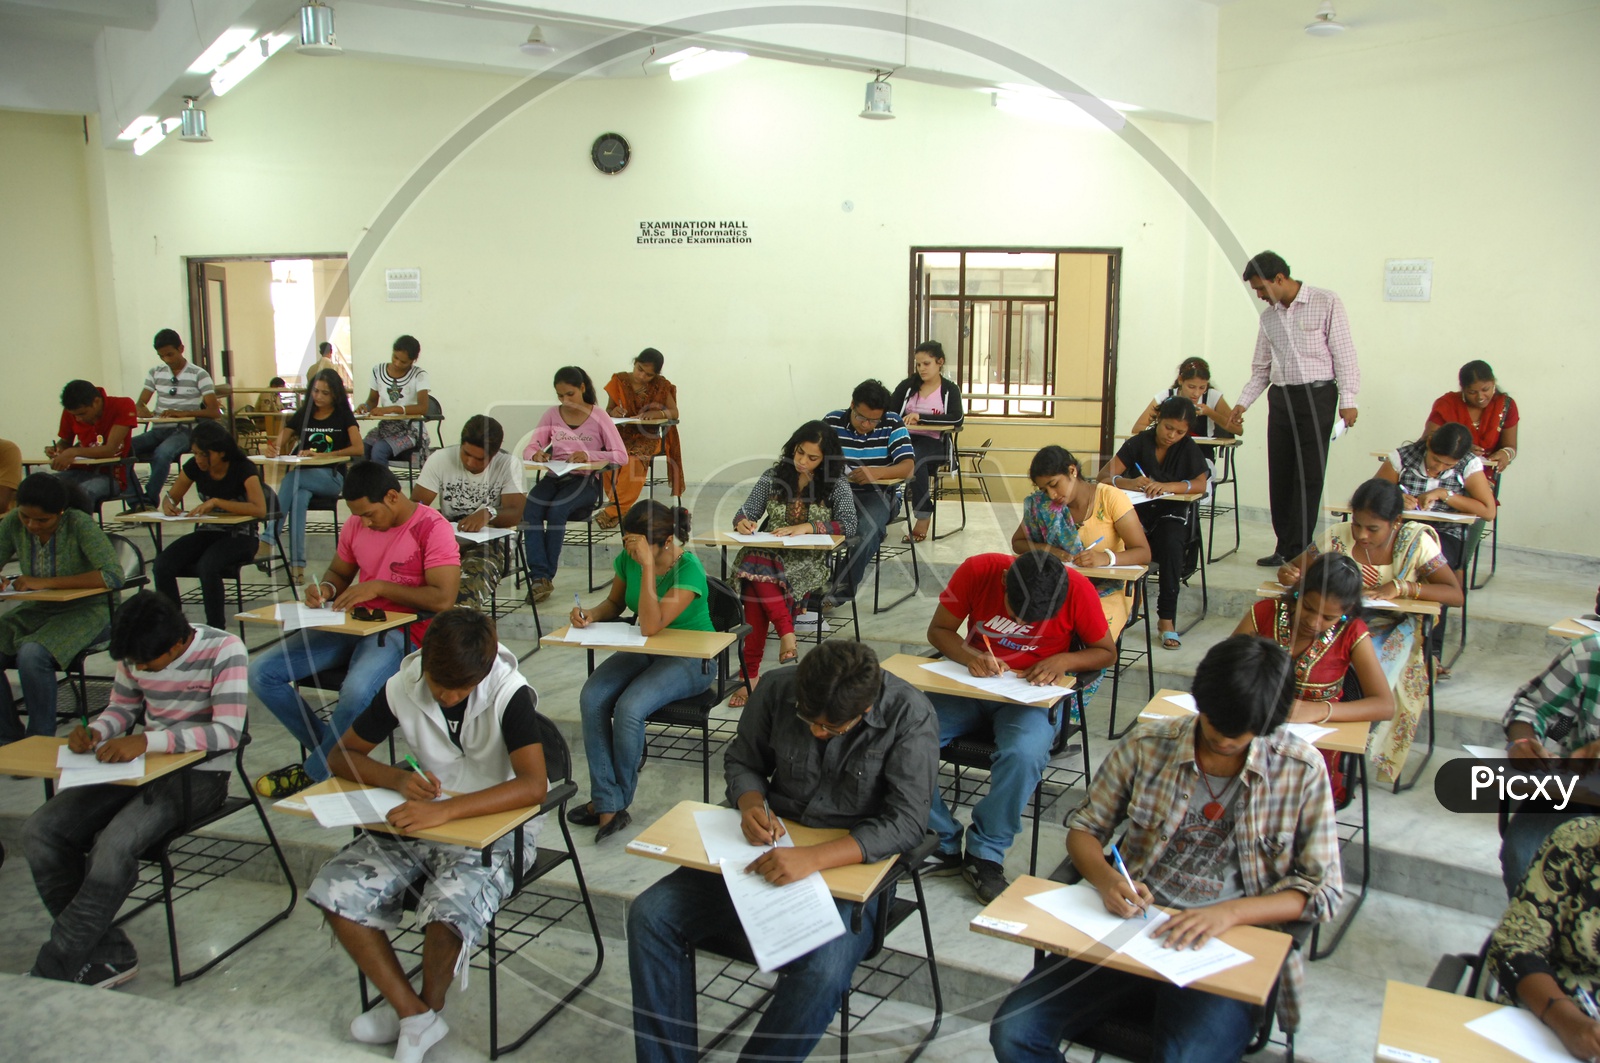 Students Taking Examination In a Exam Hall